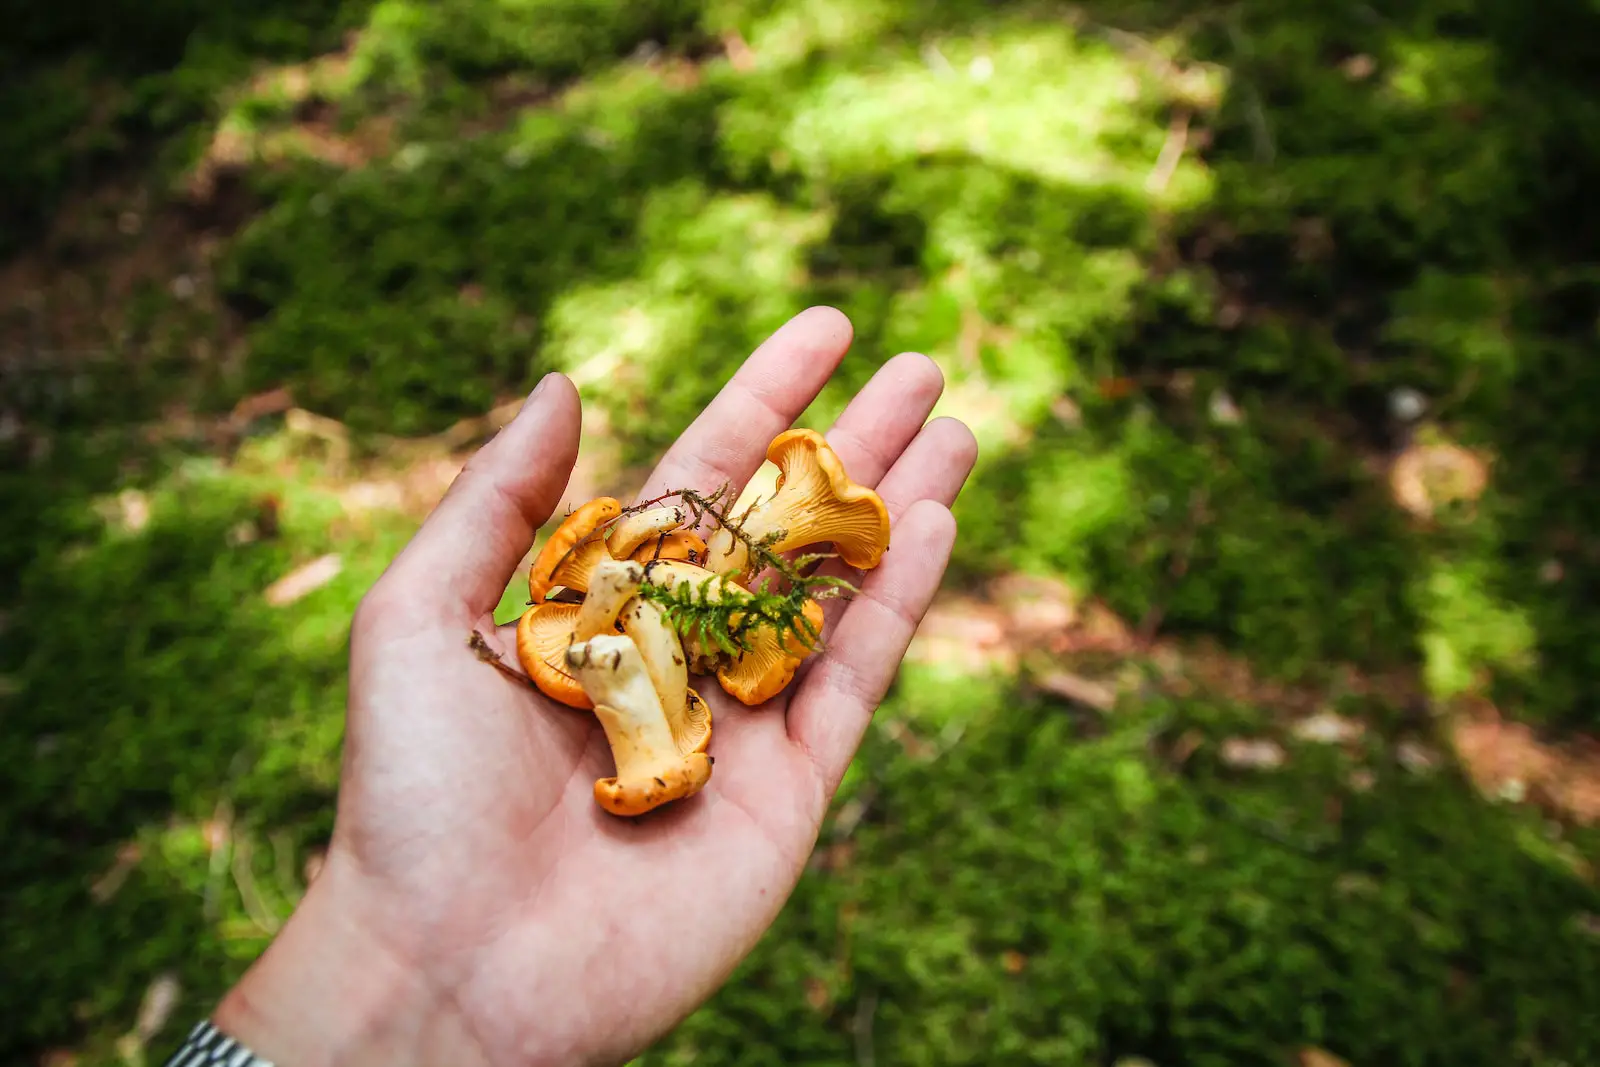 10 Epic Foods to Forage for in the Wilderness